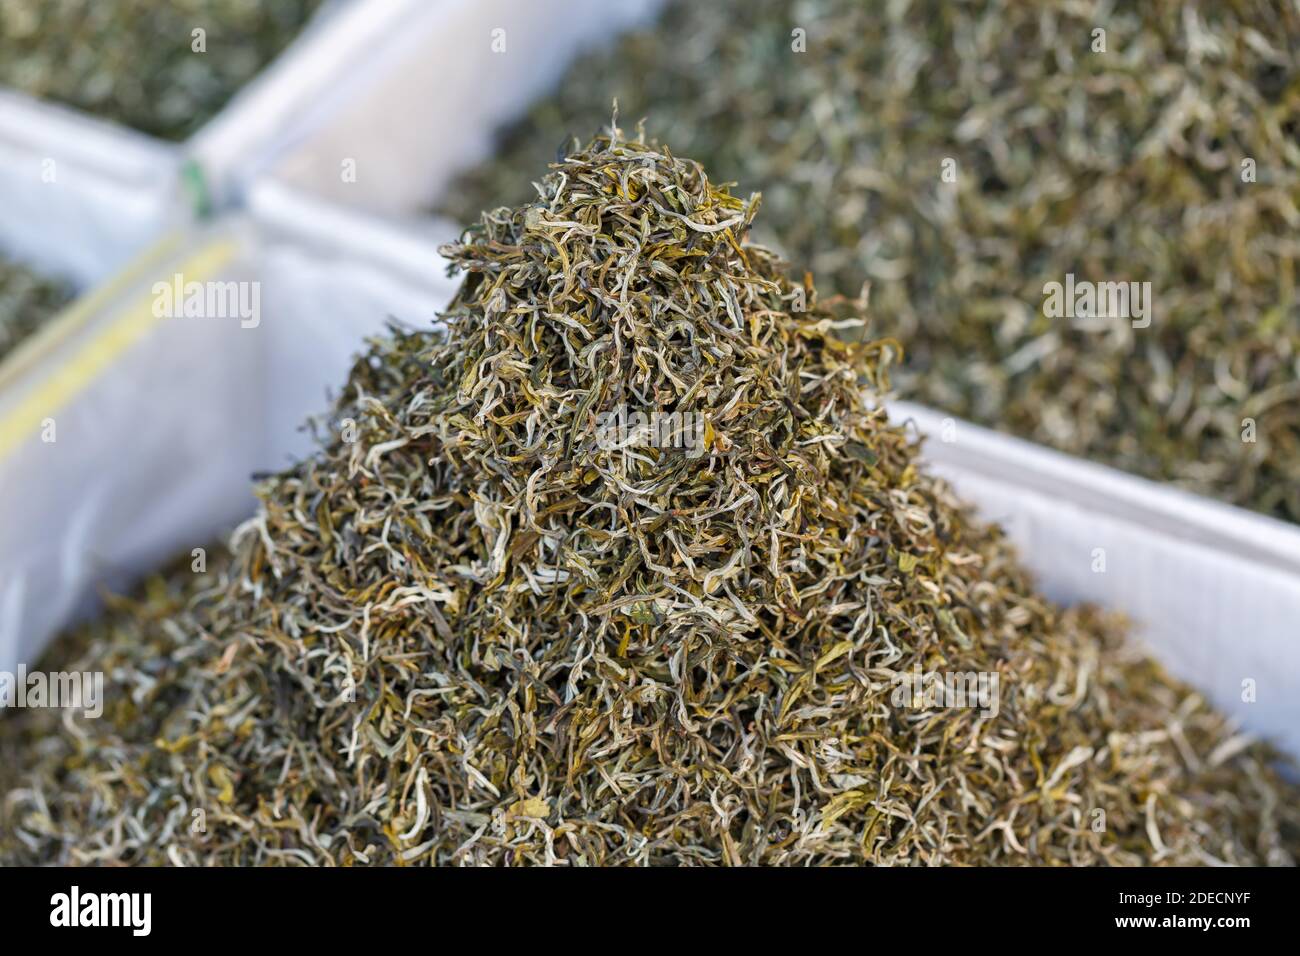 Close up of shredded green tea leaves. At a shop in a chinese village. Tea is the most popular beverage in China. Stock Photo